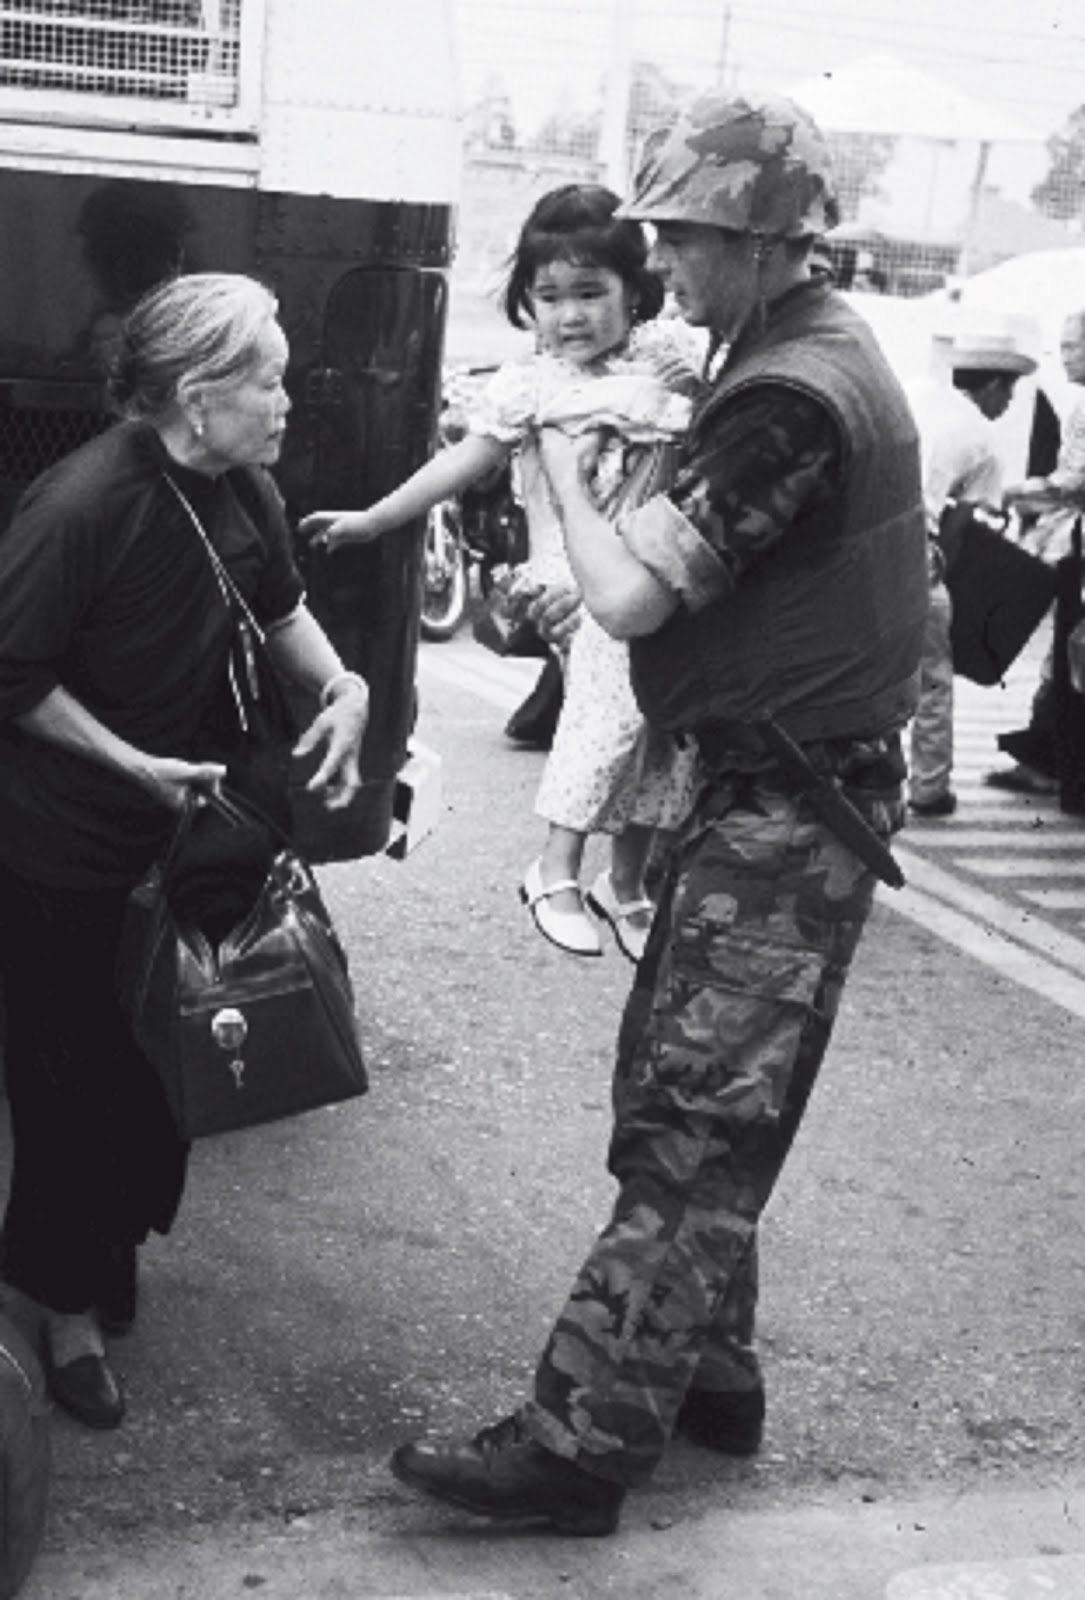 THE TRUE CONDUCT OF THE VIETNAM VETERAN WITH THE VIETNAMESE WOMEN CHILDREN AND THEIR POW*MIA;s